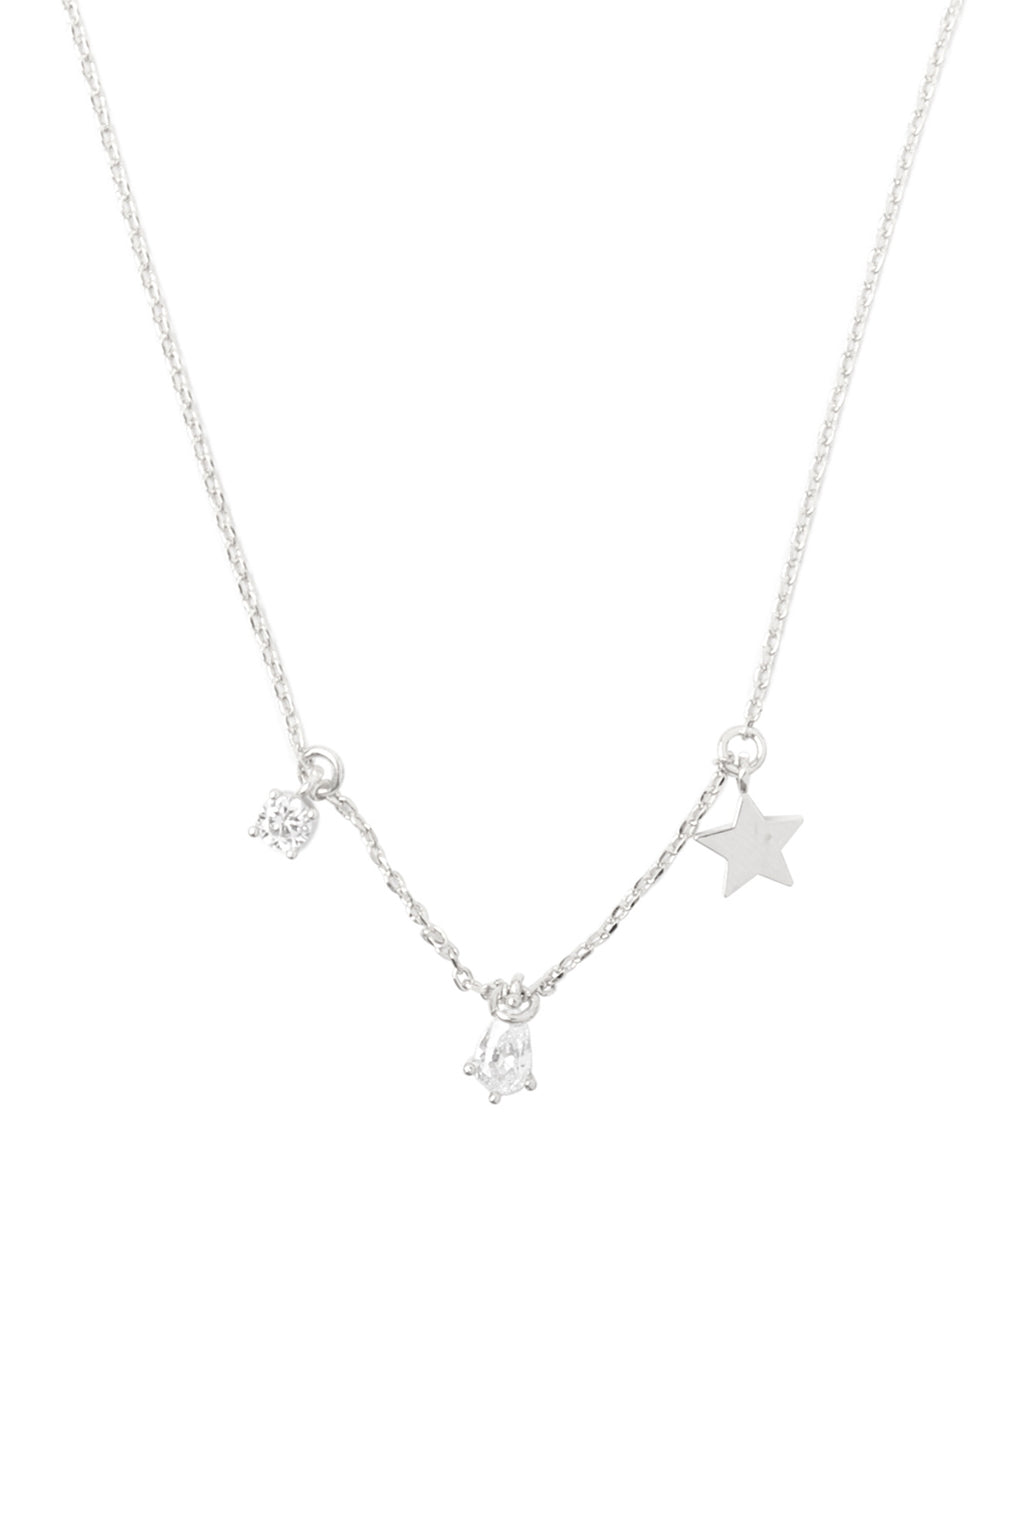 Charm Star Rhinestone Chain Necklace Silver Crystal - Pack of 6